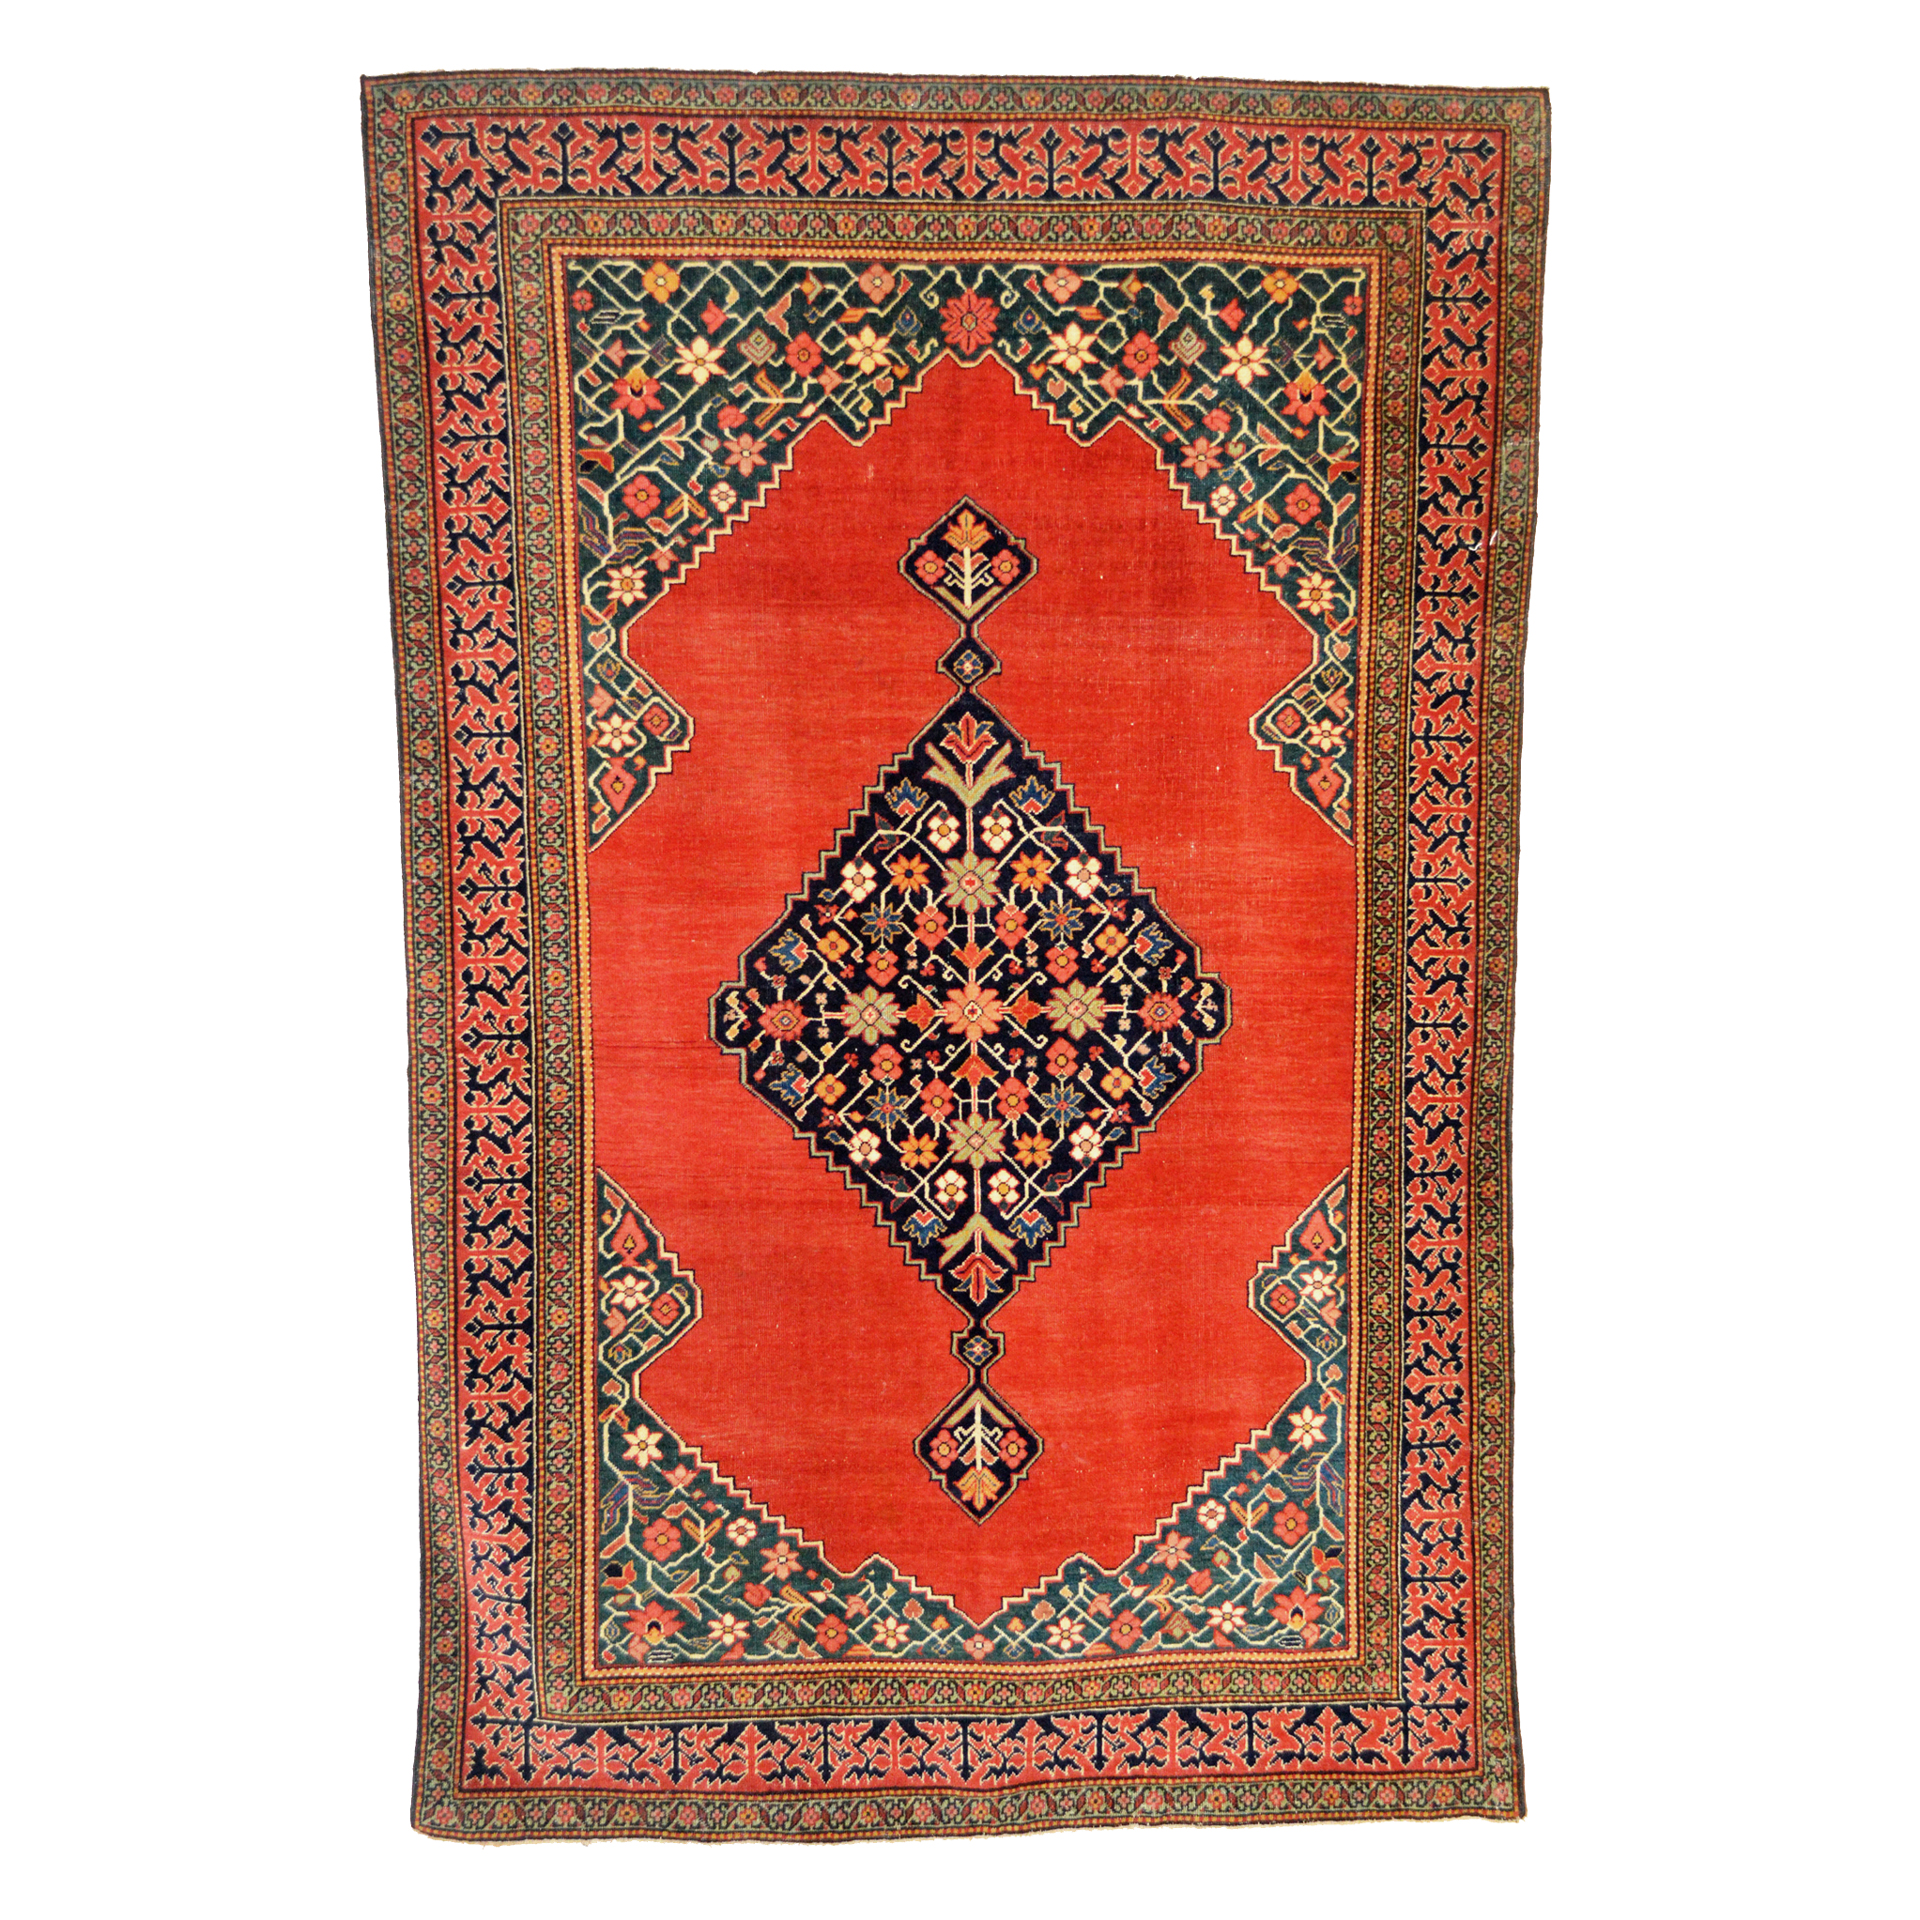 A late 19th century Fereghan rug from central Persia's Sultanabad province. The red open field contains a navy blue medallion and is framed by uncommon deep green corner spandrels. Douglas Stock Gallery is a Boston,MA area dealer specializing in highly select antique Oriental rugs, with particular emphasis on antique Fereghan rugs, antique Fereghan Sarouk rugs, antique Mohtasham Kashan rugs, antique Heriz "Serapi" rugs and antique Bidjar rugs. Antique rugs Wellesley, Newton, Brookline, South Natick,MA area New England, antique Oriental rugs New York by appointment, antique Oriental rugs Washington,DC area by appointment